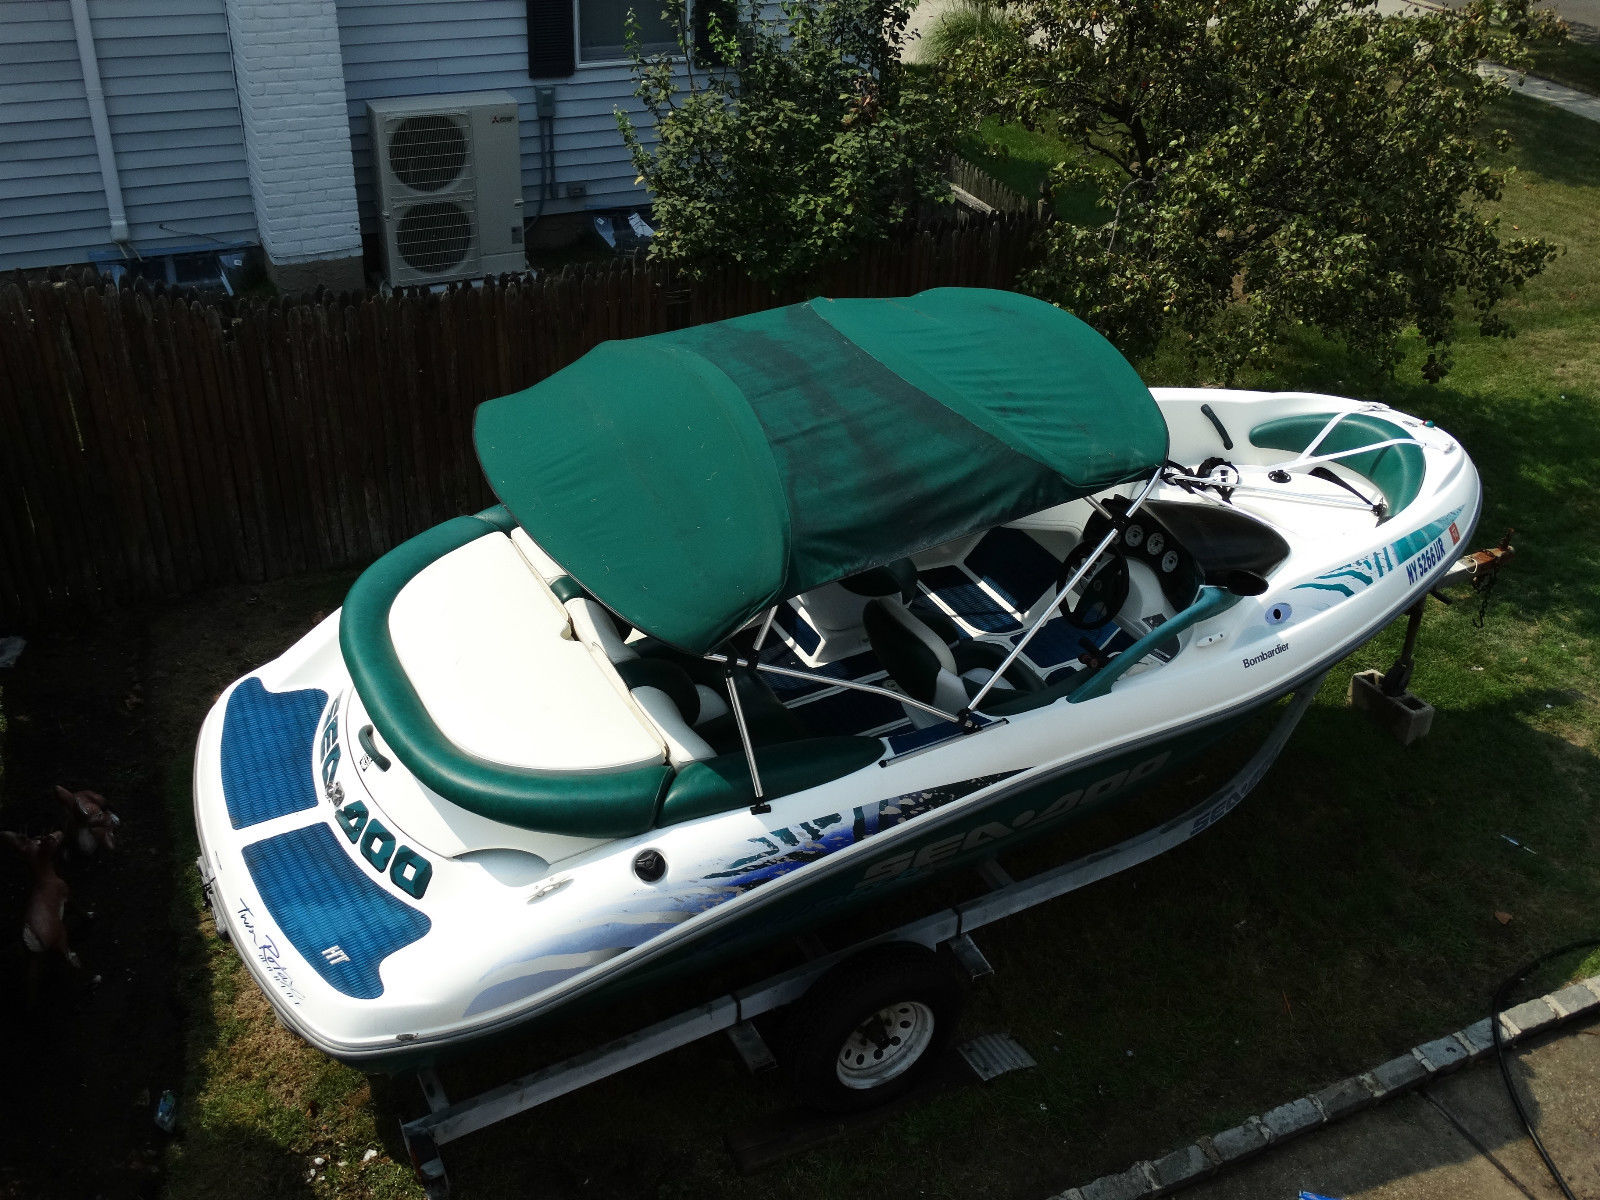 Sea Doo CHALLENGER 1800 1998 for sale for $5,000 - Boats 